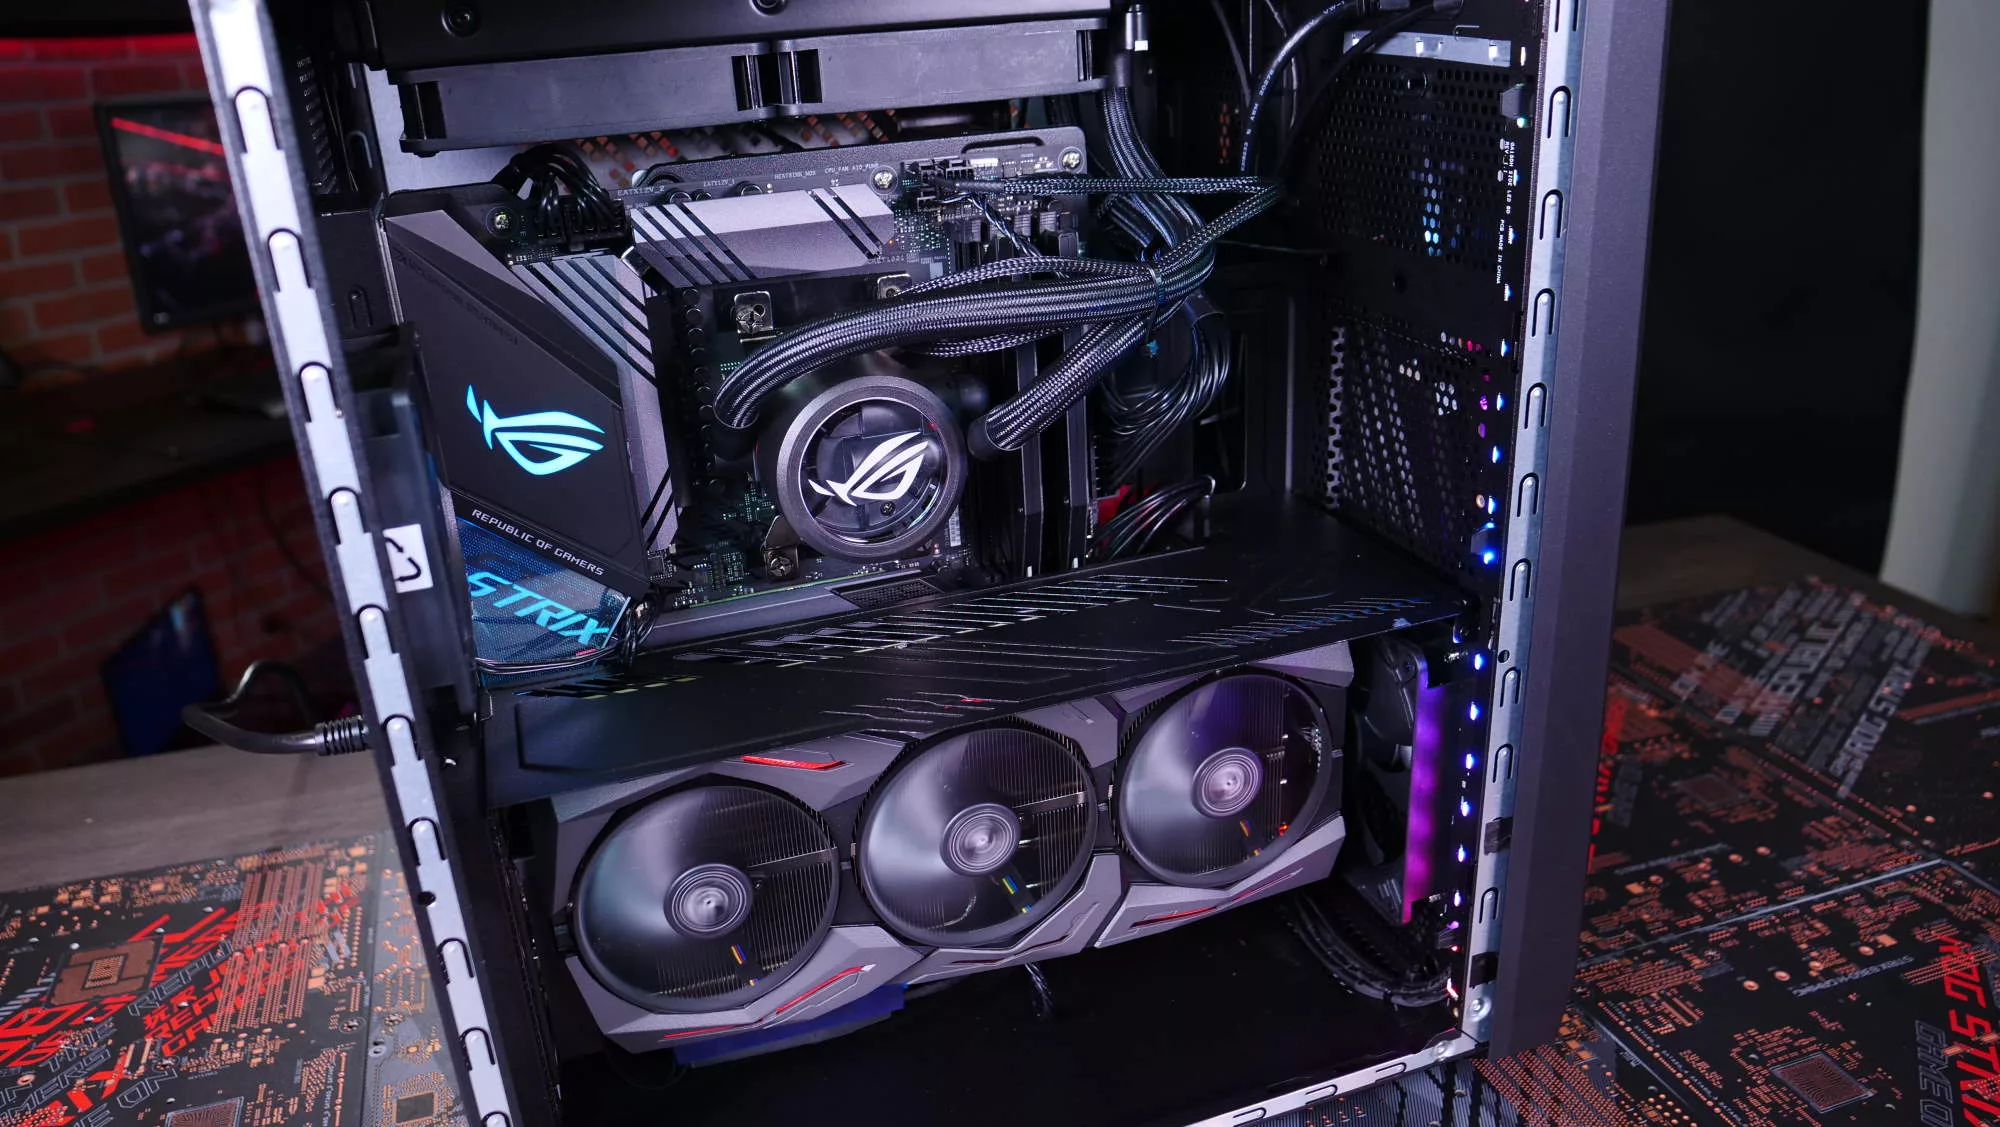 Going hands-on with the ROG Strix GA35's killer combo of Ryzen 9 3950X and  GeForce RTX 2080 Ti power | ROG - Republic of Gamers ประเทศไทย